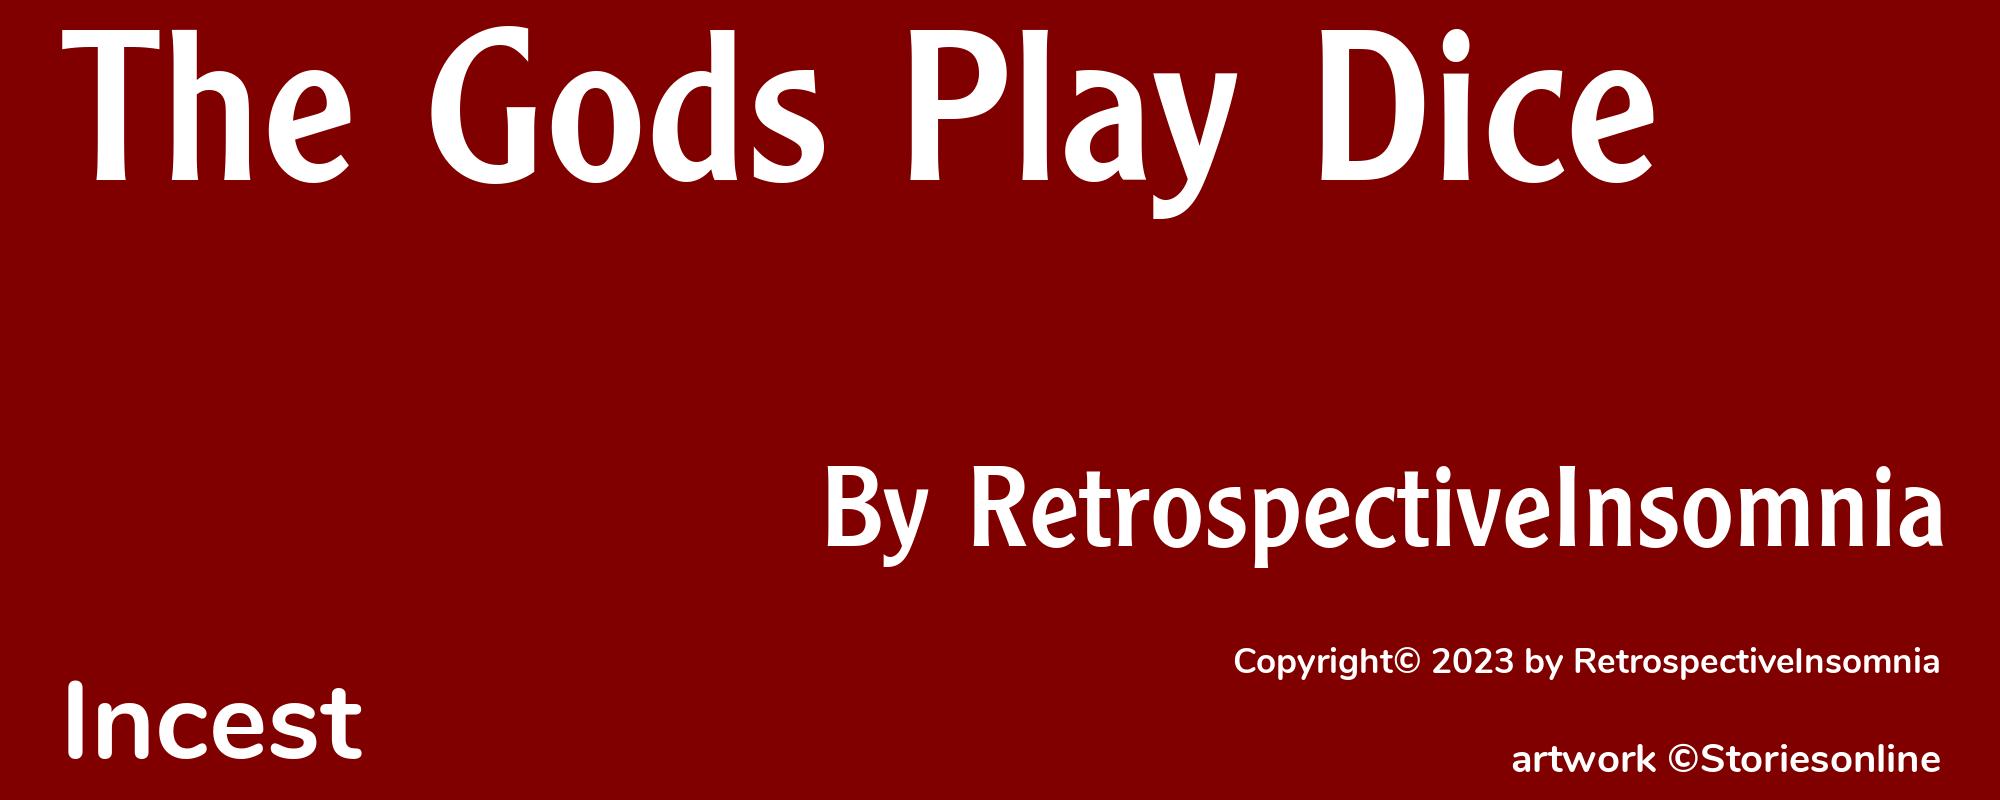 The Gods Play Dice - Cover